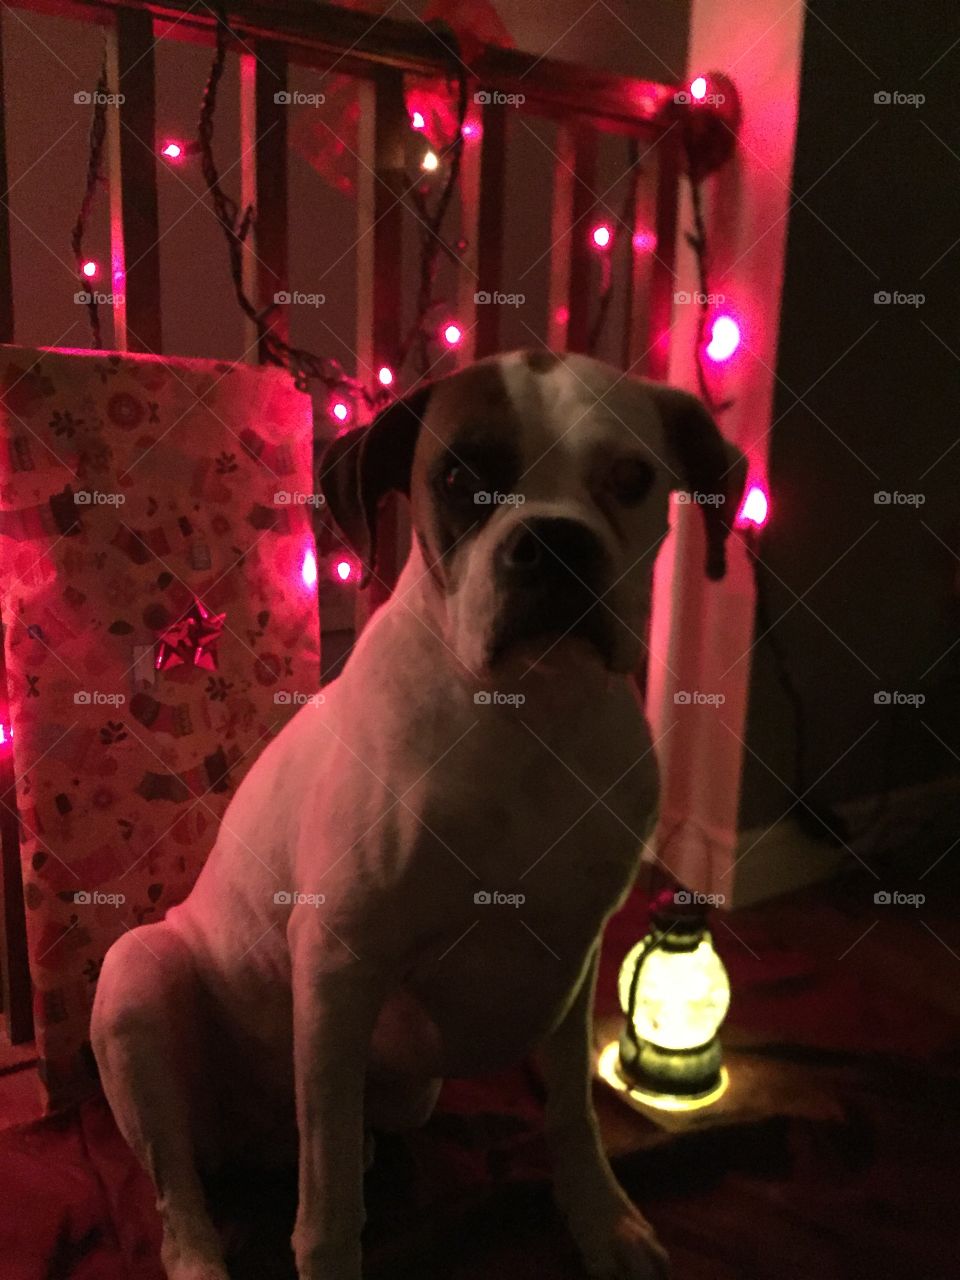 Beautiful photo taken with lily setting in the red Christmas lights with gift box in back ground.